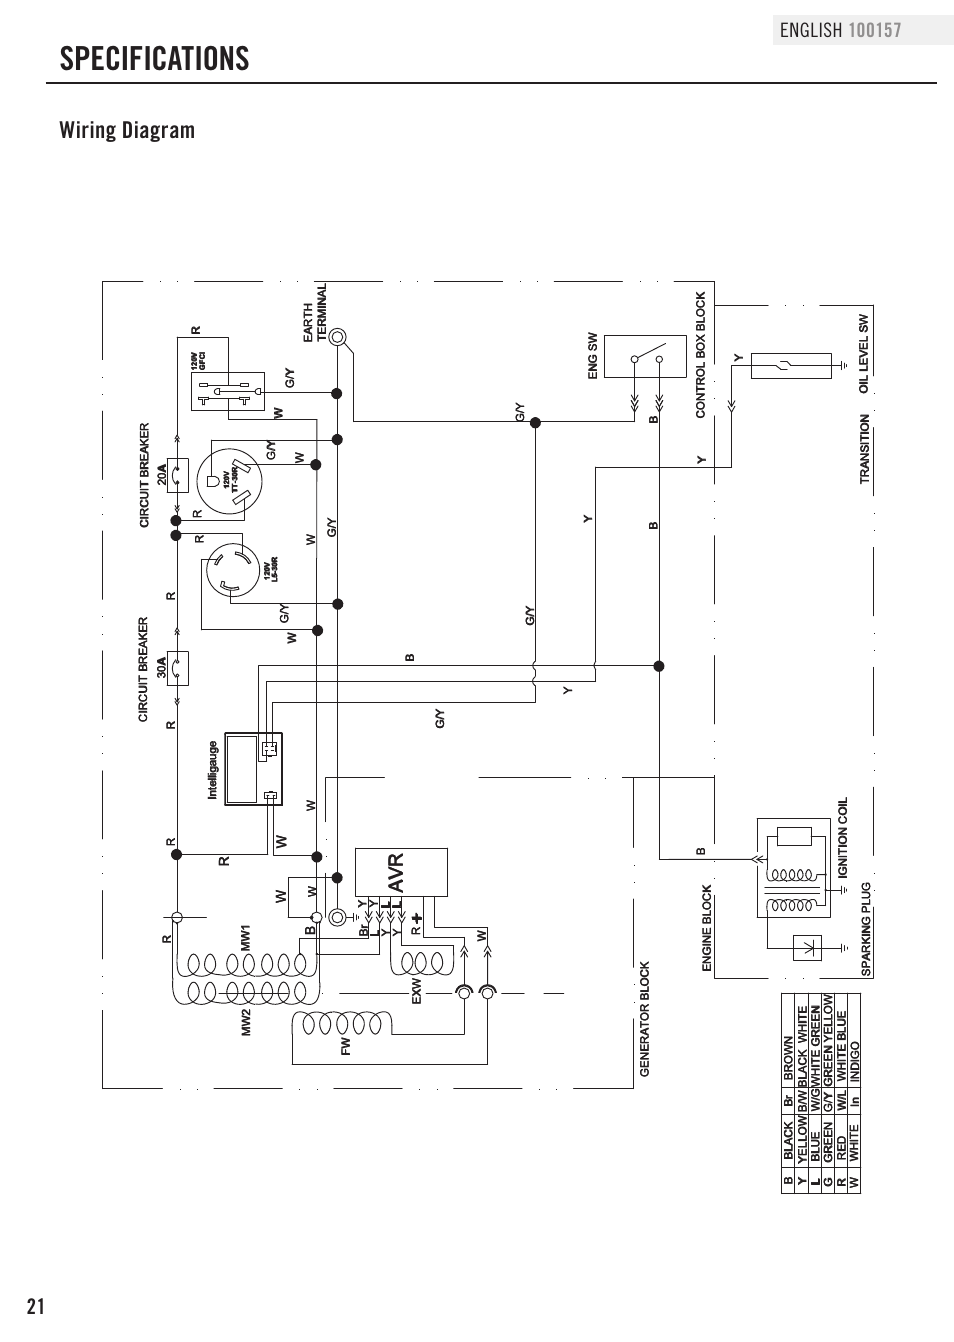 Specifications, Wiring diagram | Champion Power Equipment 100157 User